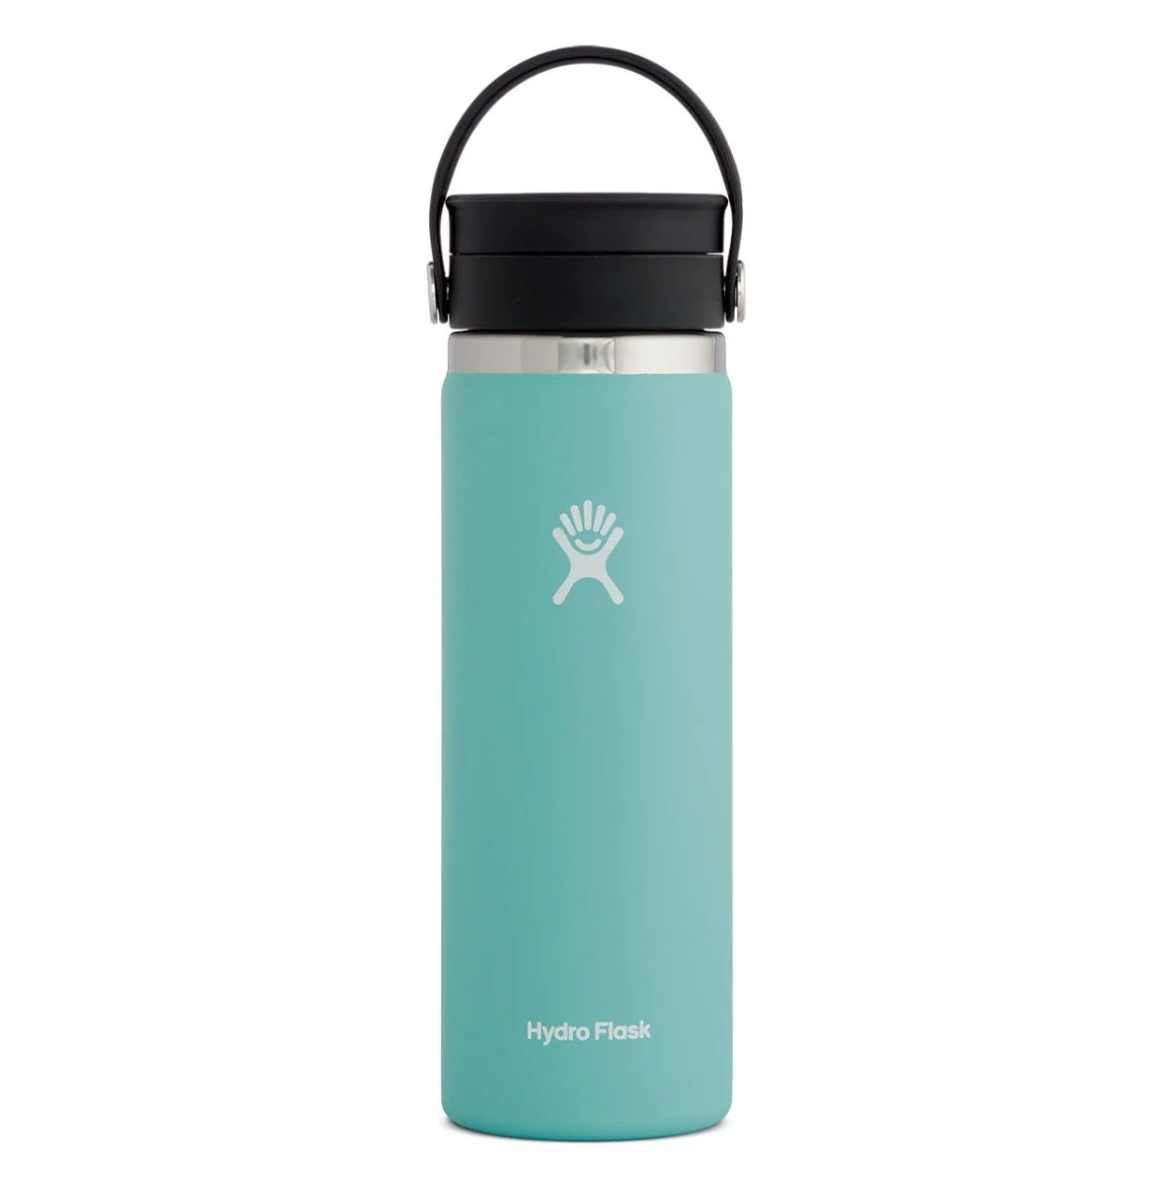 Hydro Flask 20-Ounce Wide Mouth Bottle with Flex Sip Lid